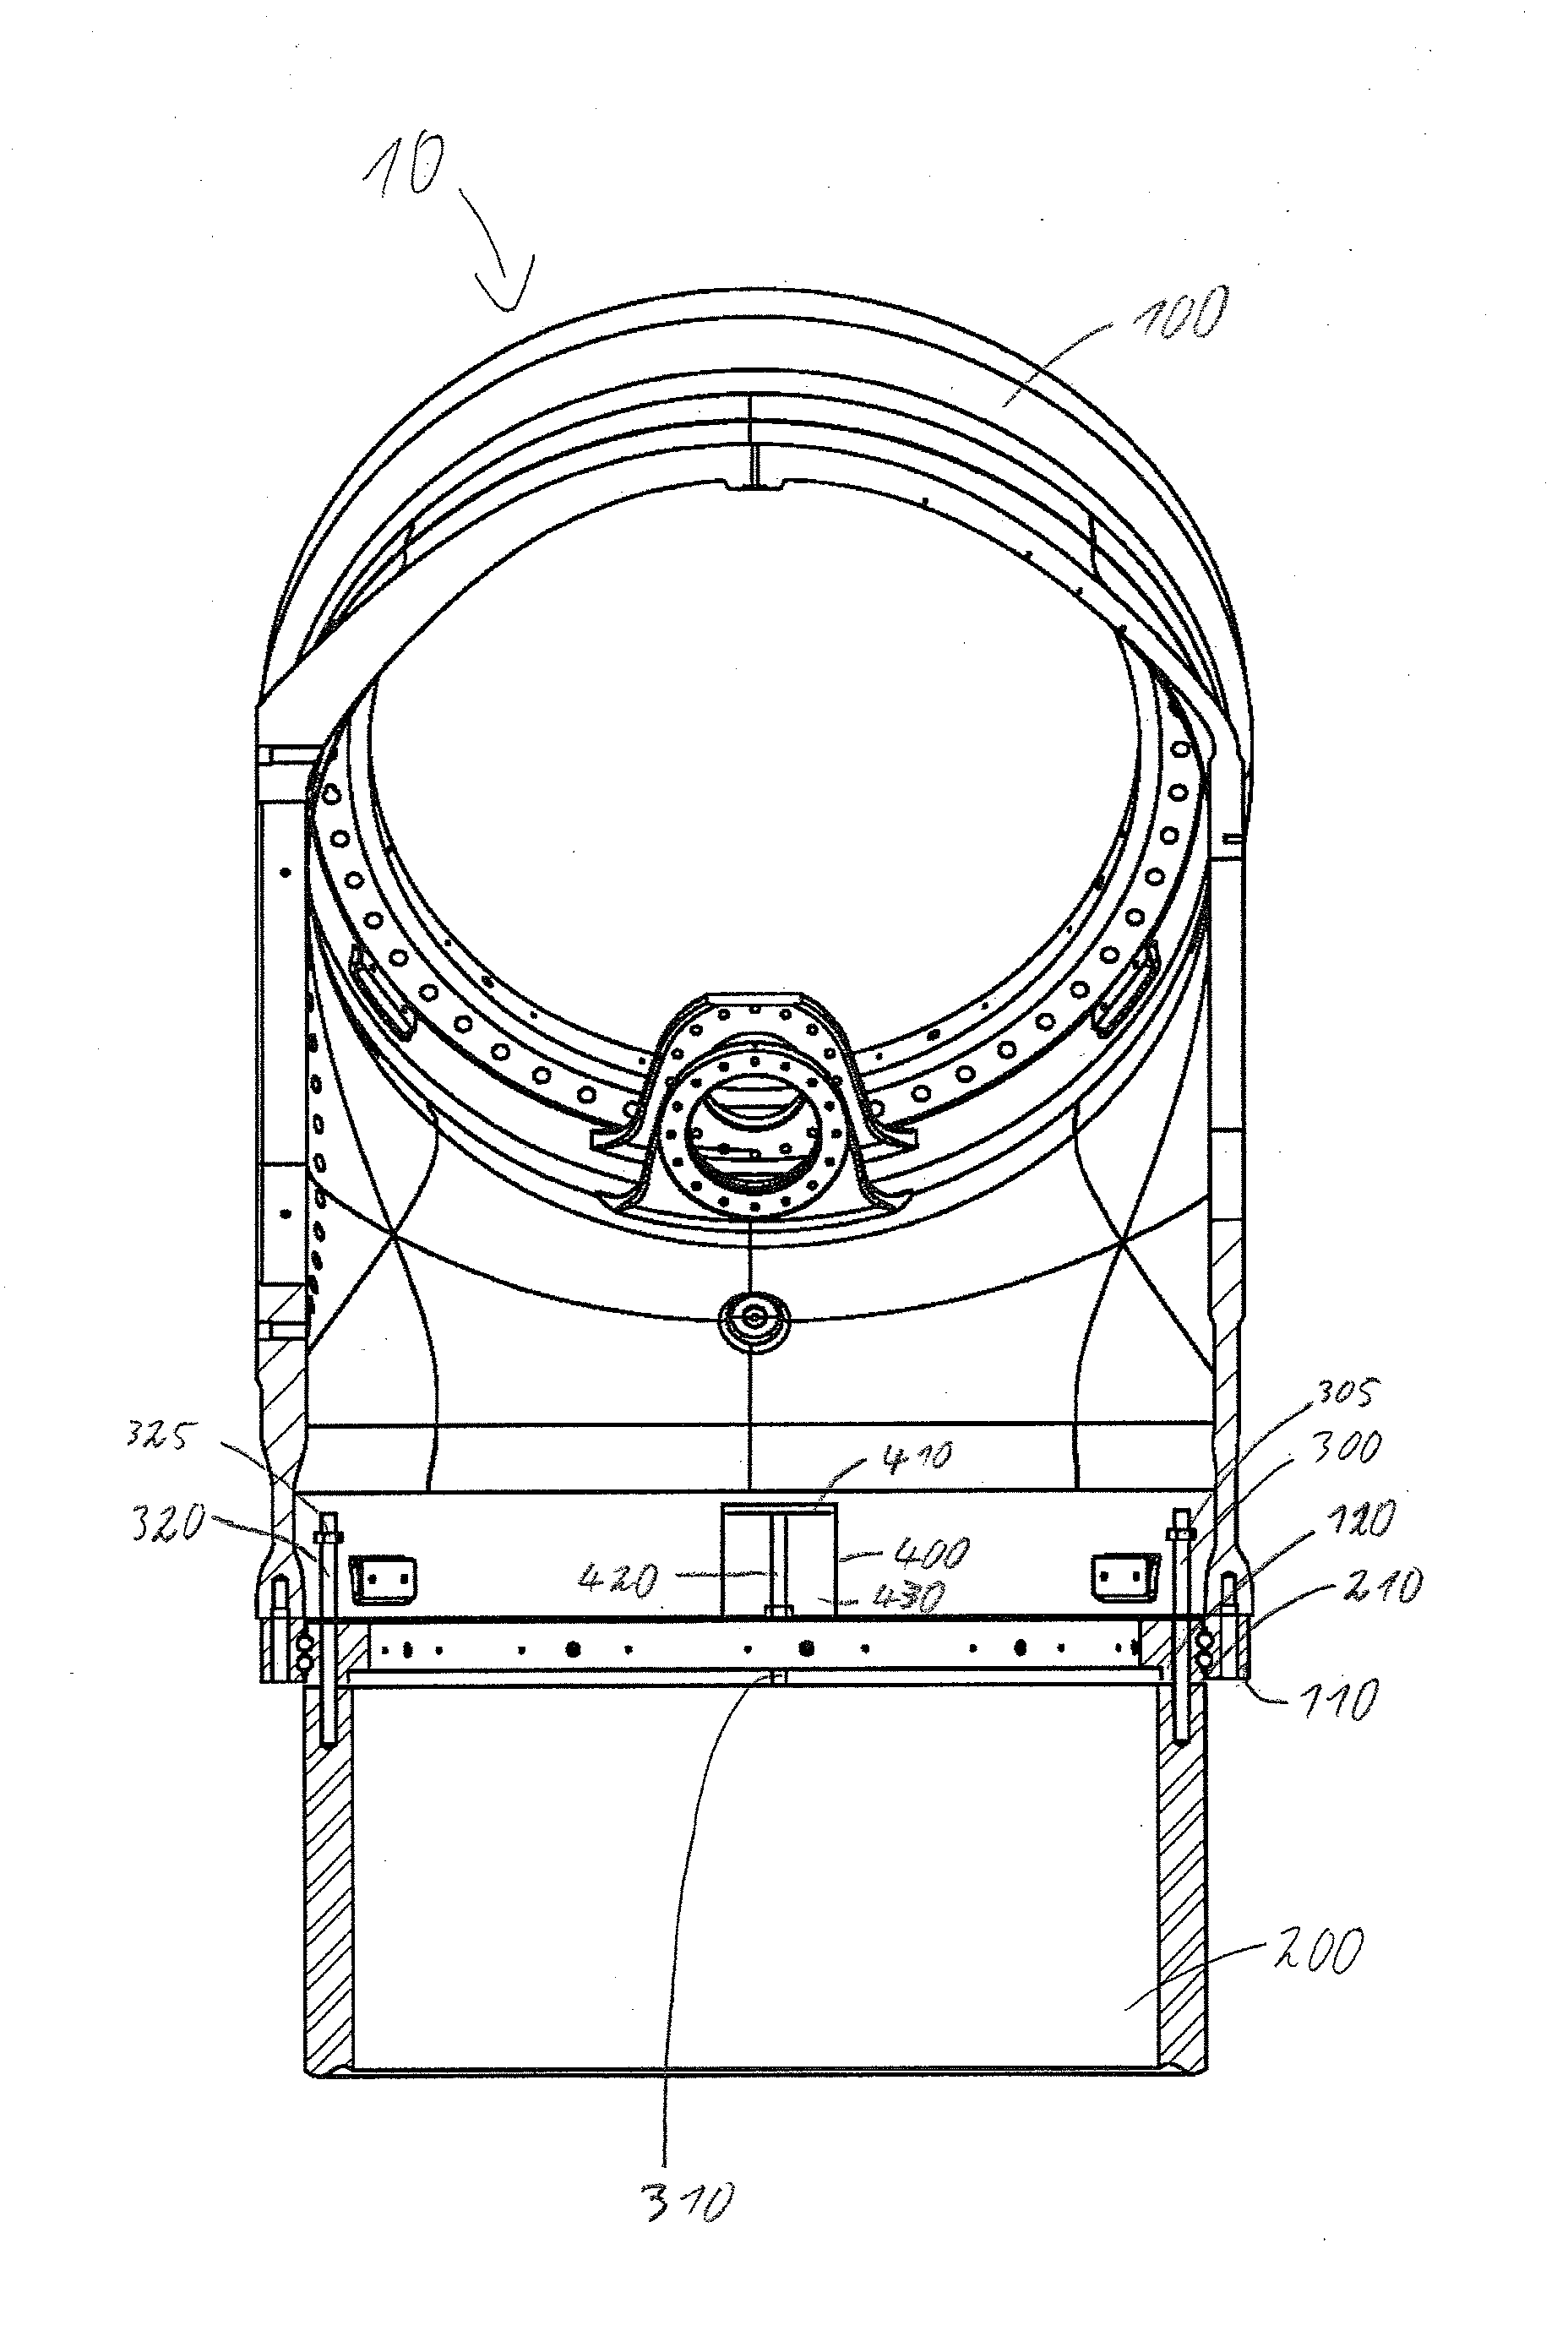 Method and apparatus for turning a rotor blade bearing on wind turbines without using a mobile crane